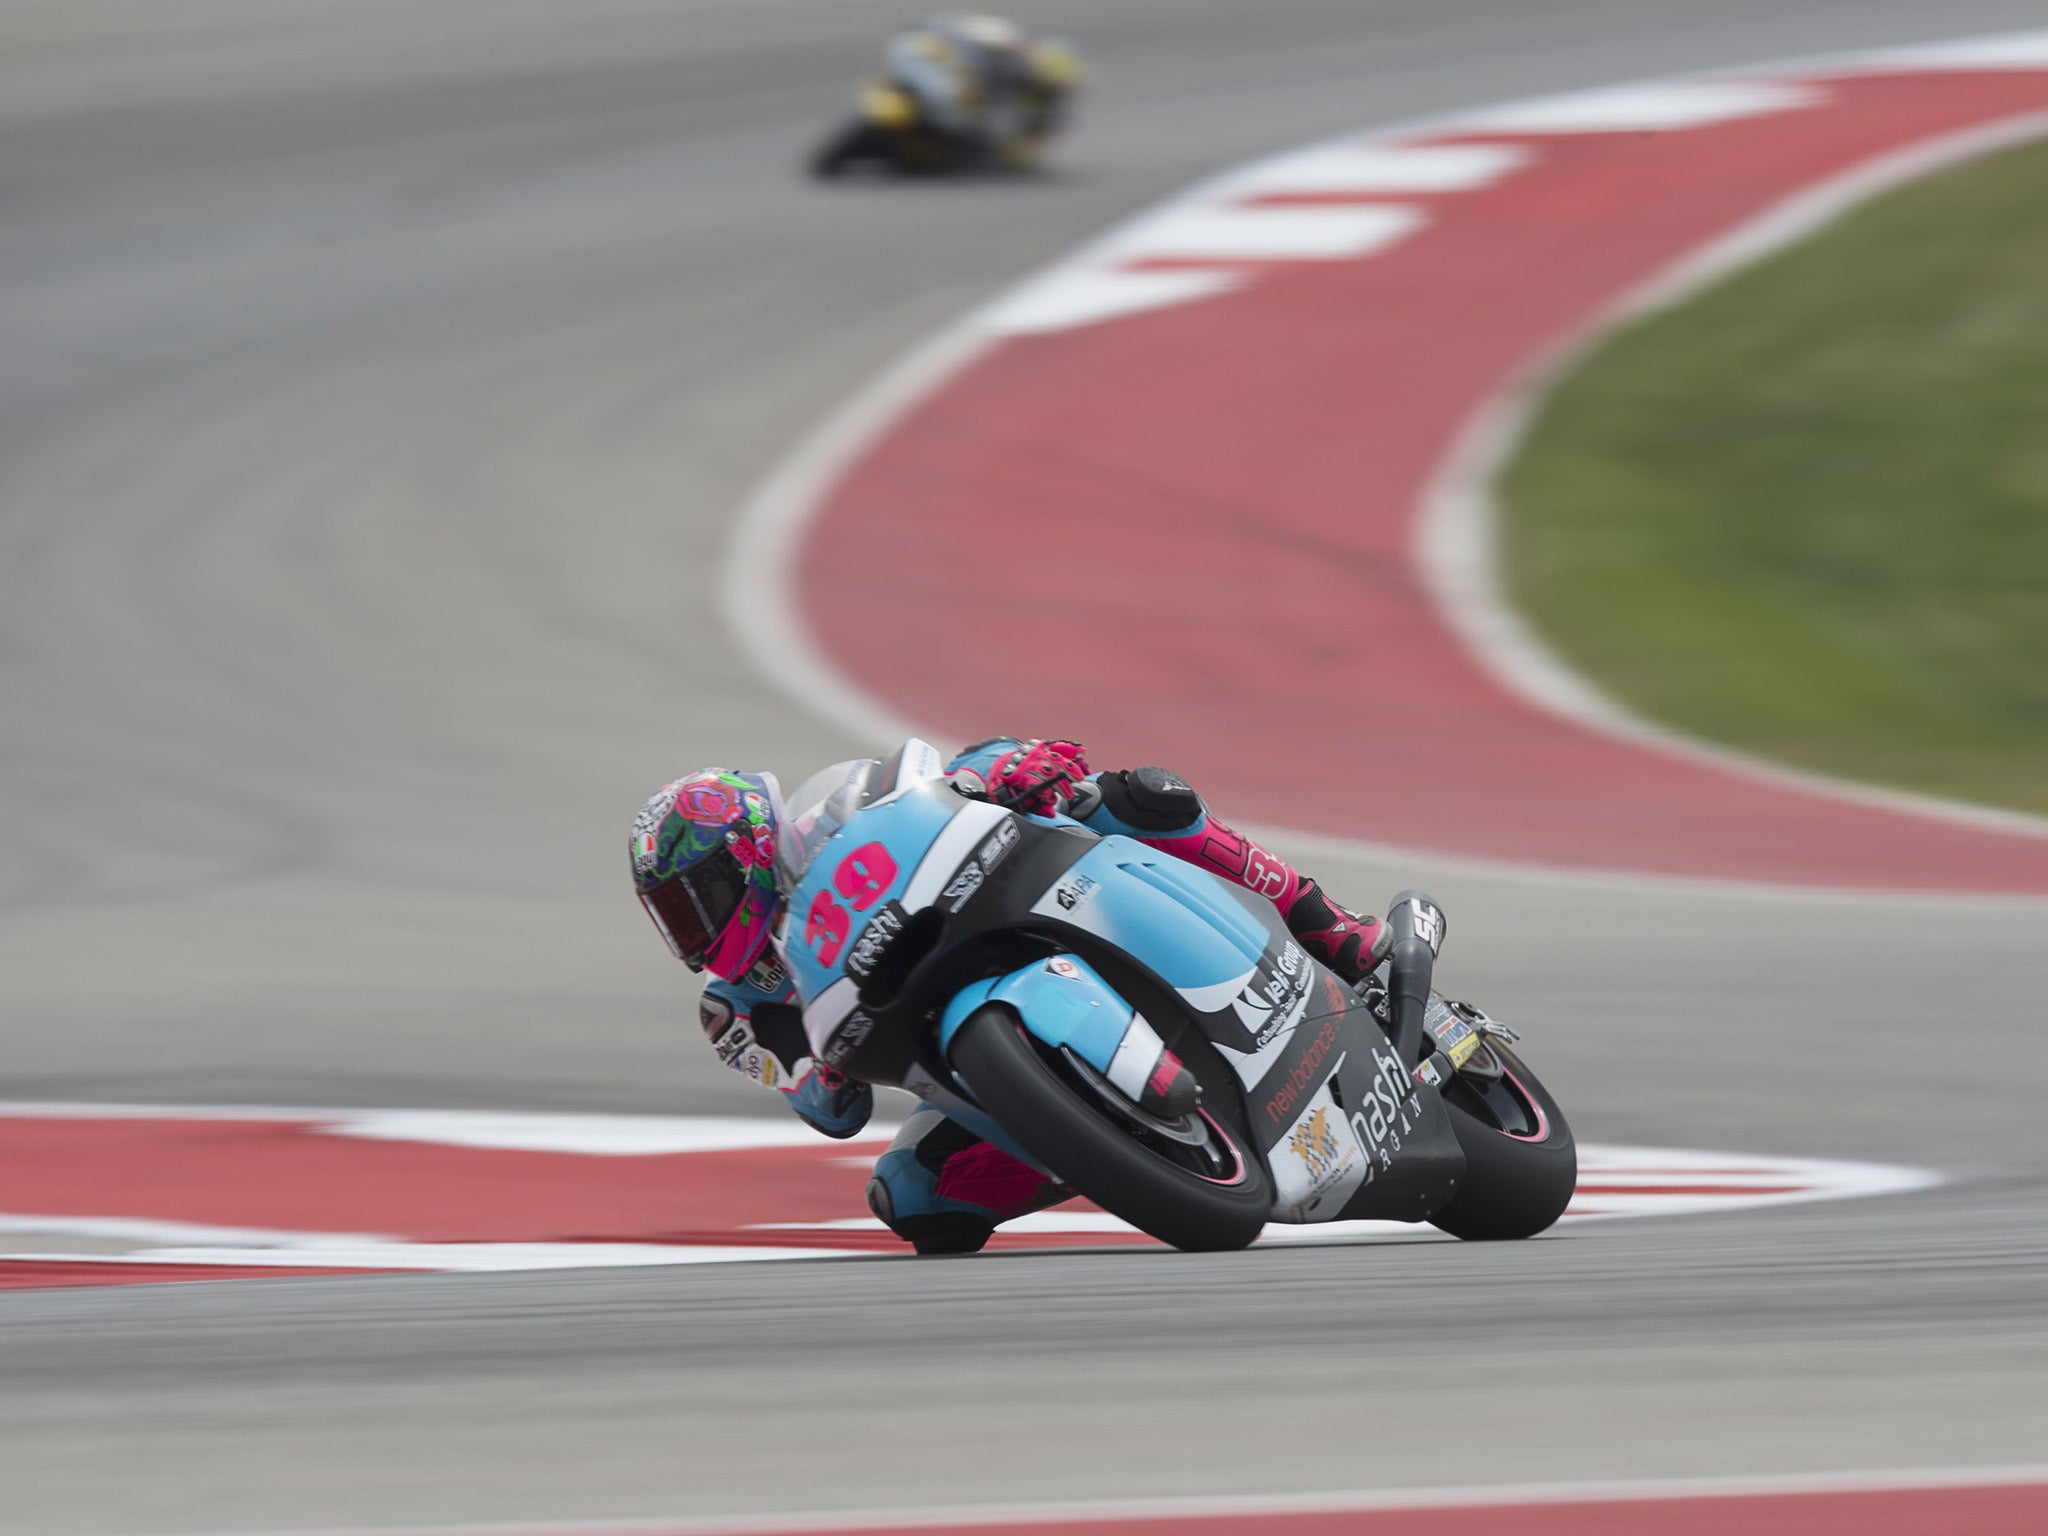 Luis Salom was practicing for the Moto2 Barcelona Grand Prix at the time of the crash